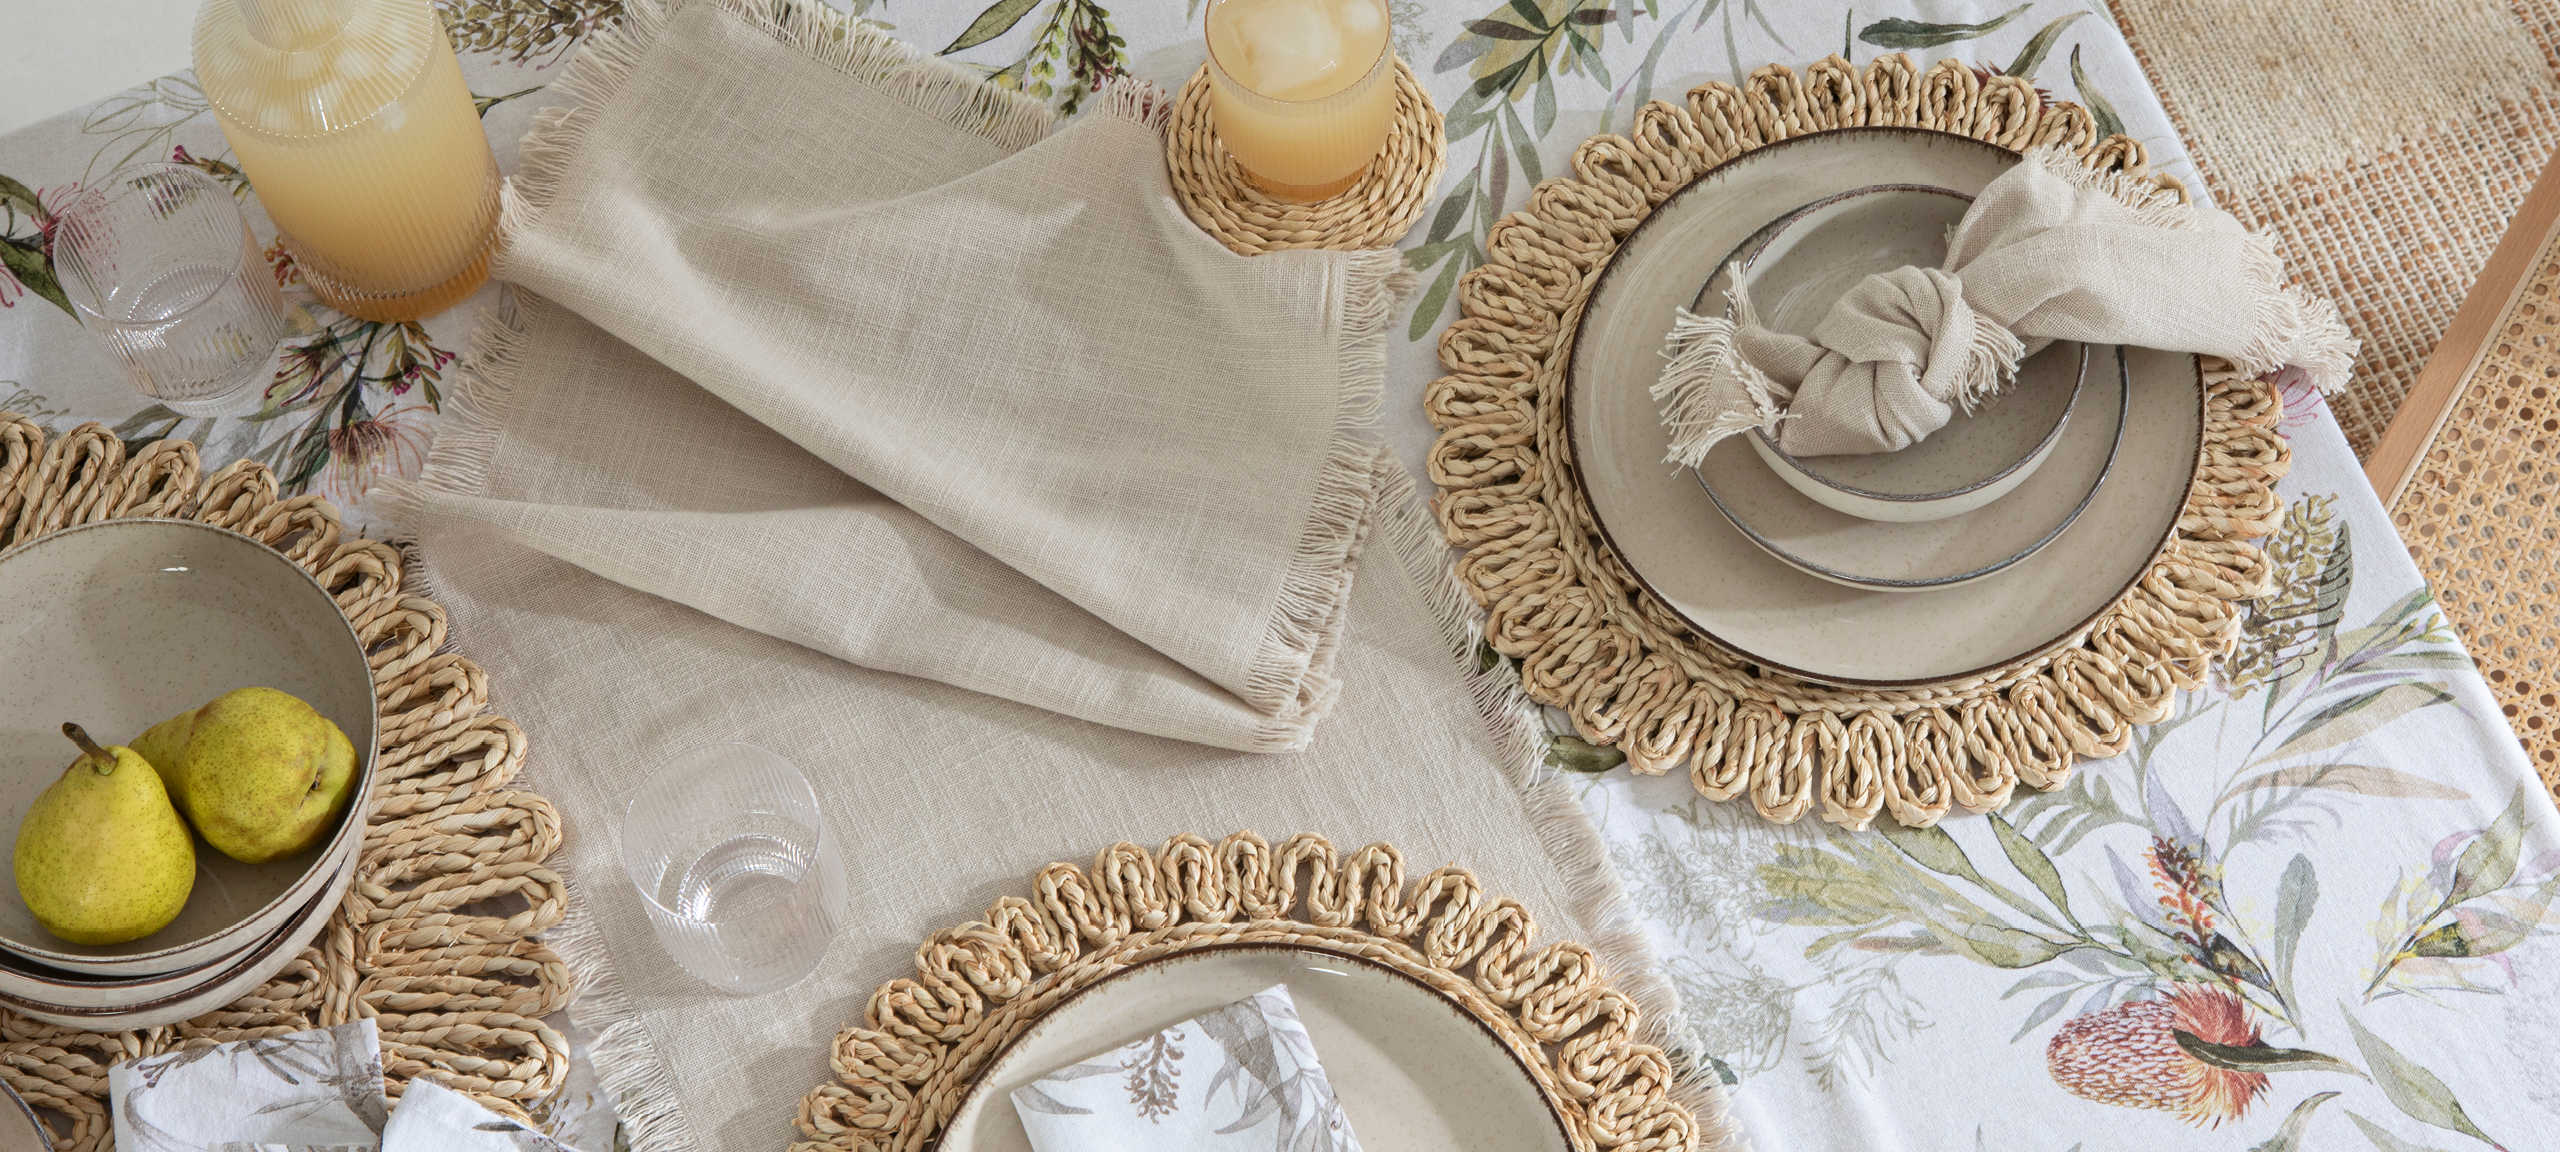 Pillow Talk dining table placemats 